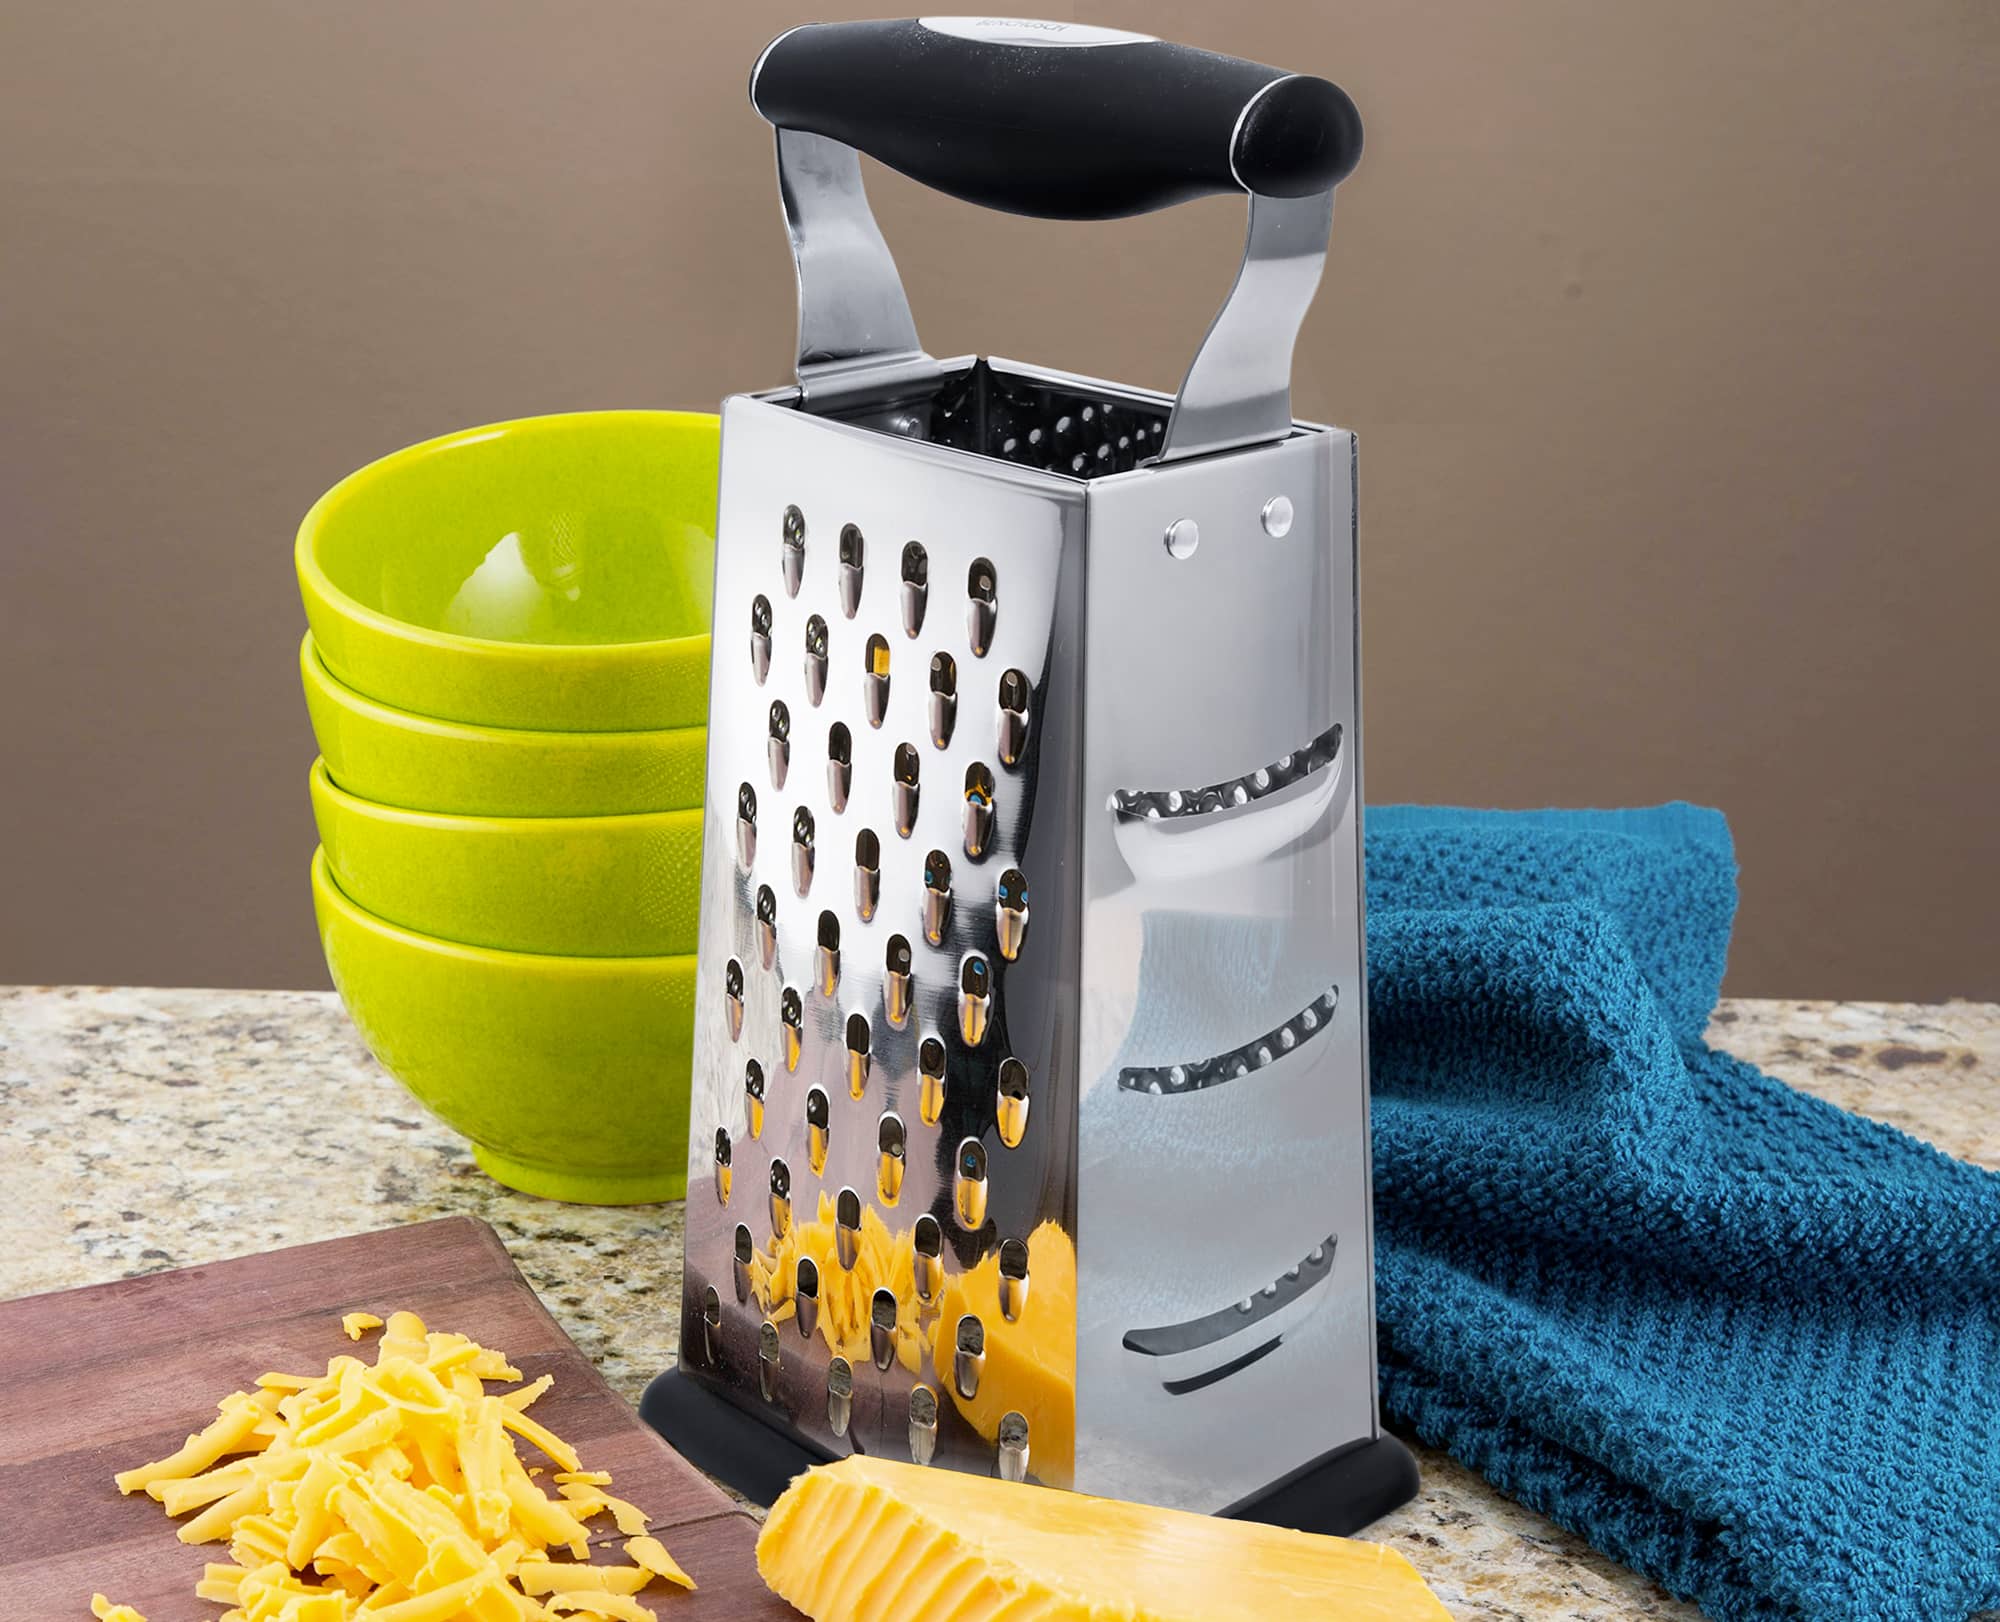 Grated Cheese with Benchusch 4 side grater box in the kitchen